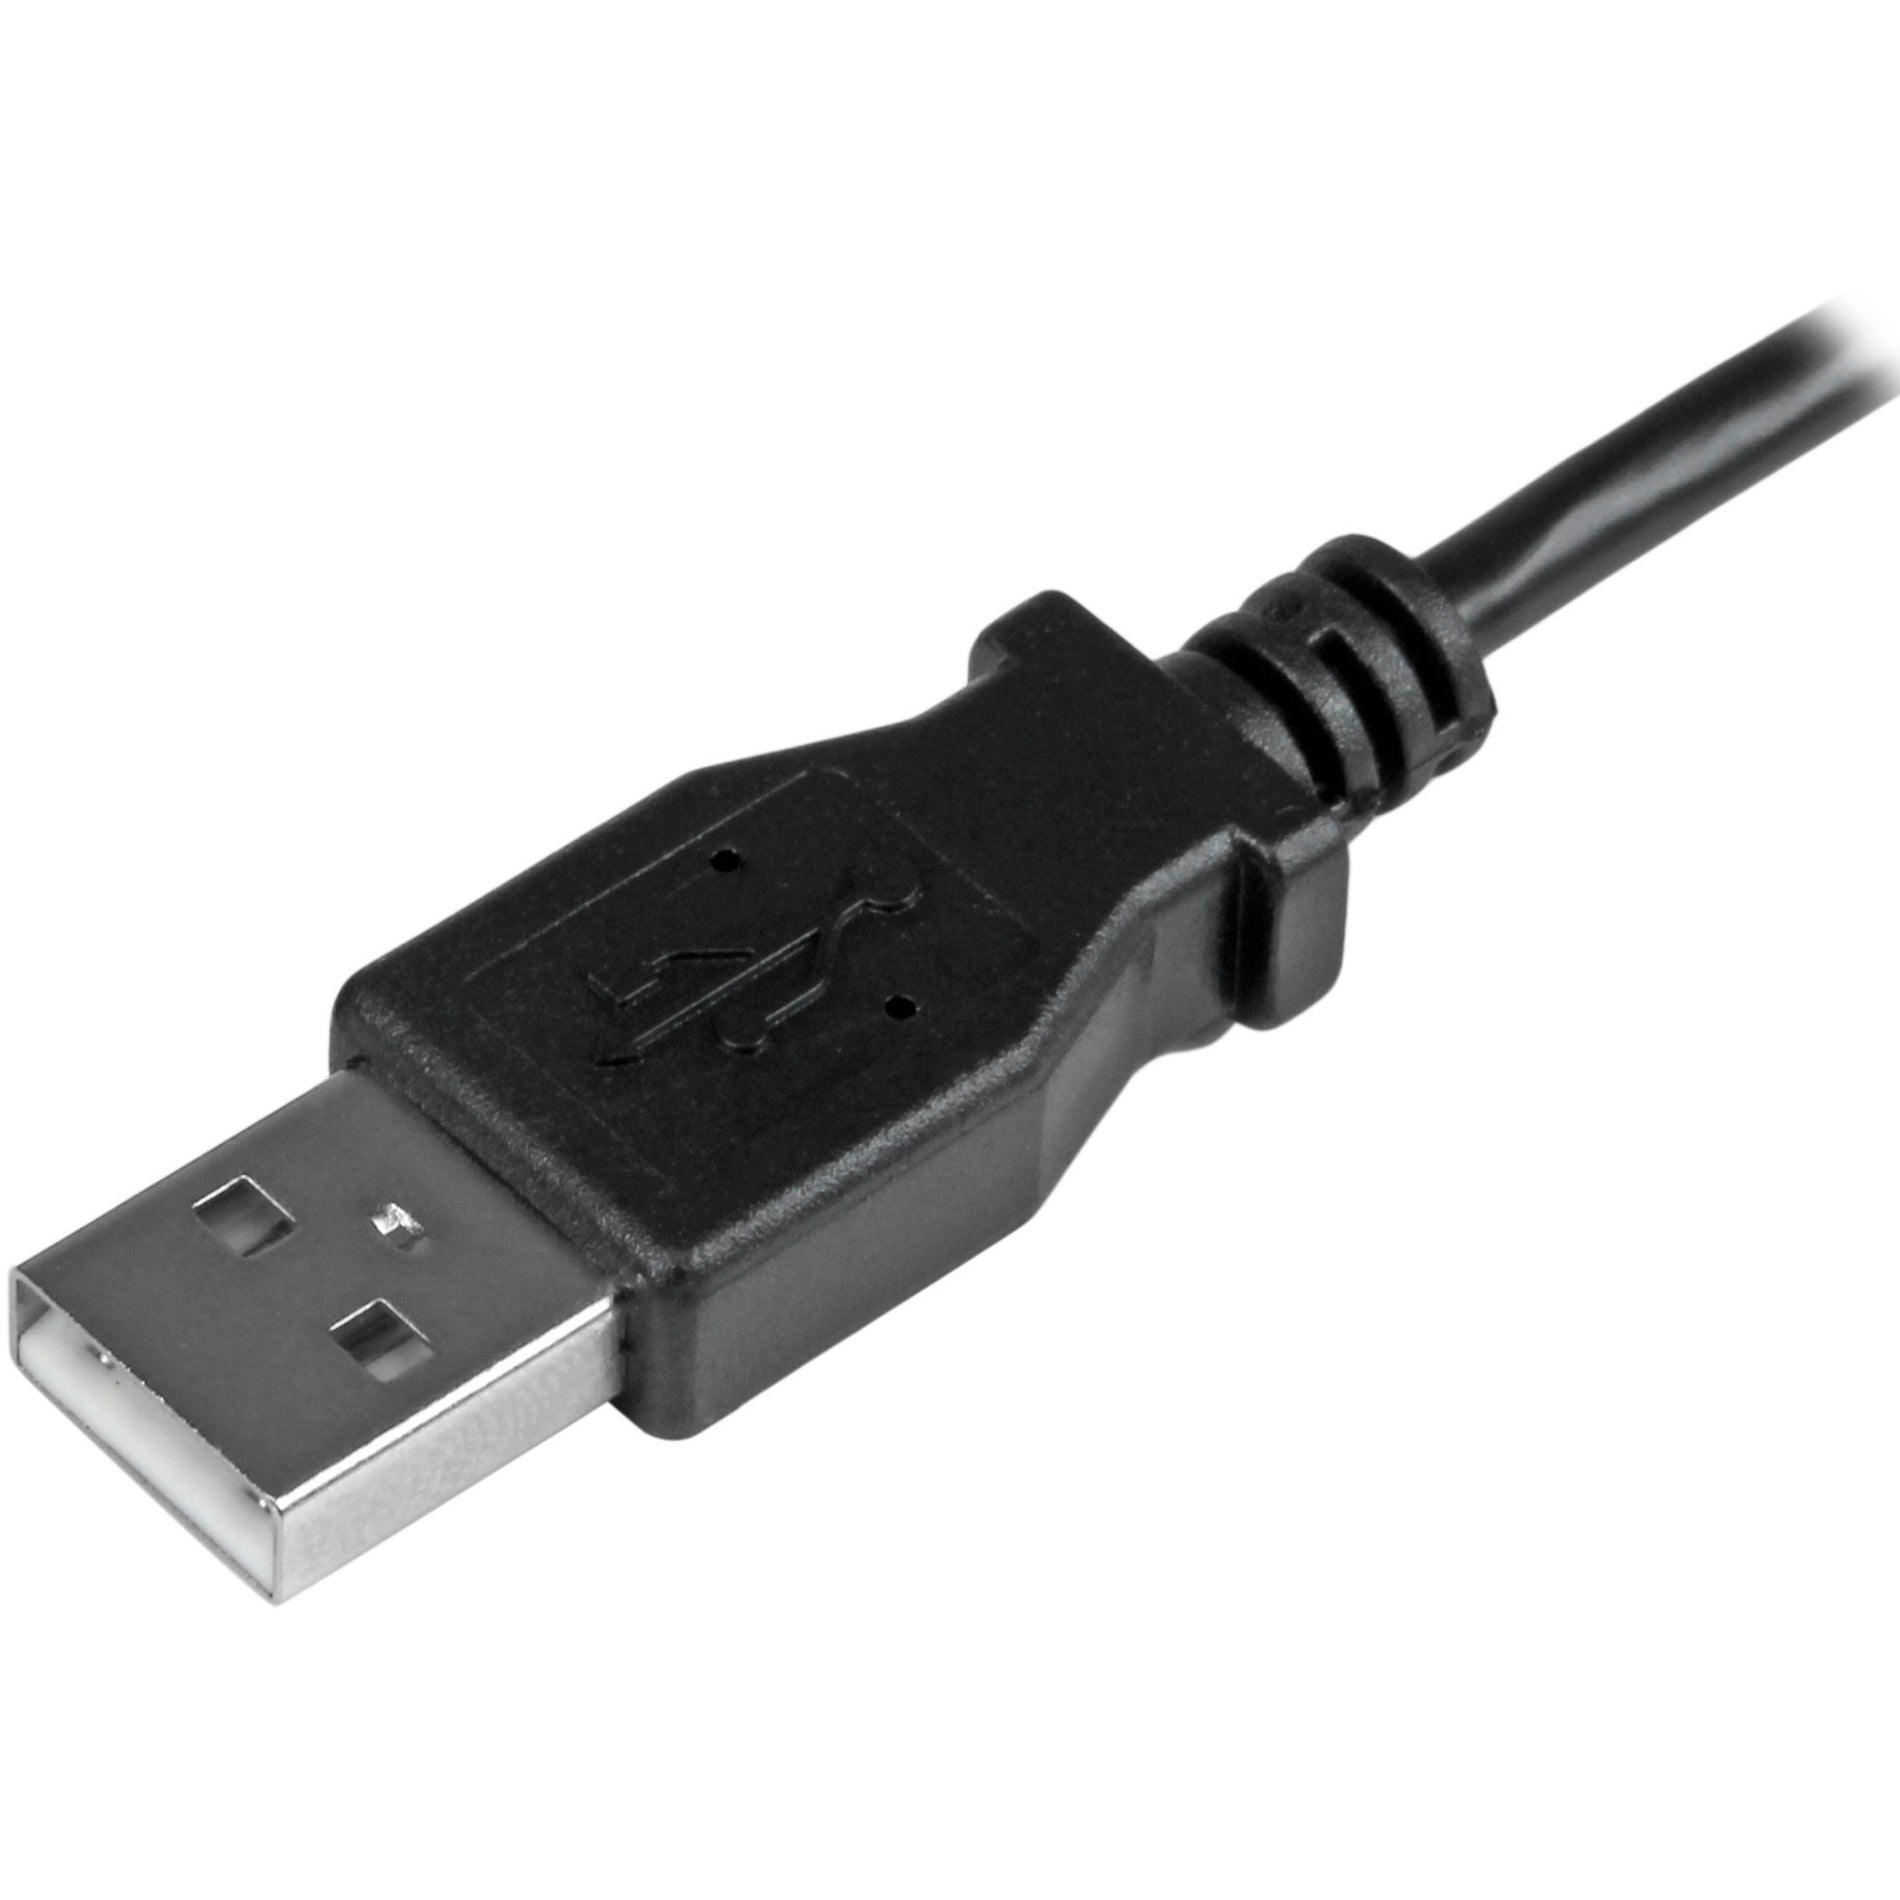 StarTech.com USBAUB2MLA Micro-USB Charge-and-Sync Cable M/M - Left-Angle Micro-USB - 2m (6 ft.), Charging and Data Transfer, 24 AWG